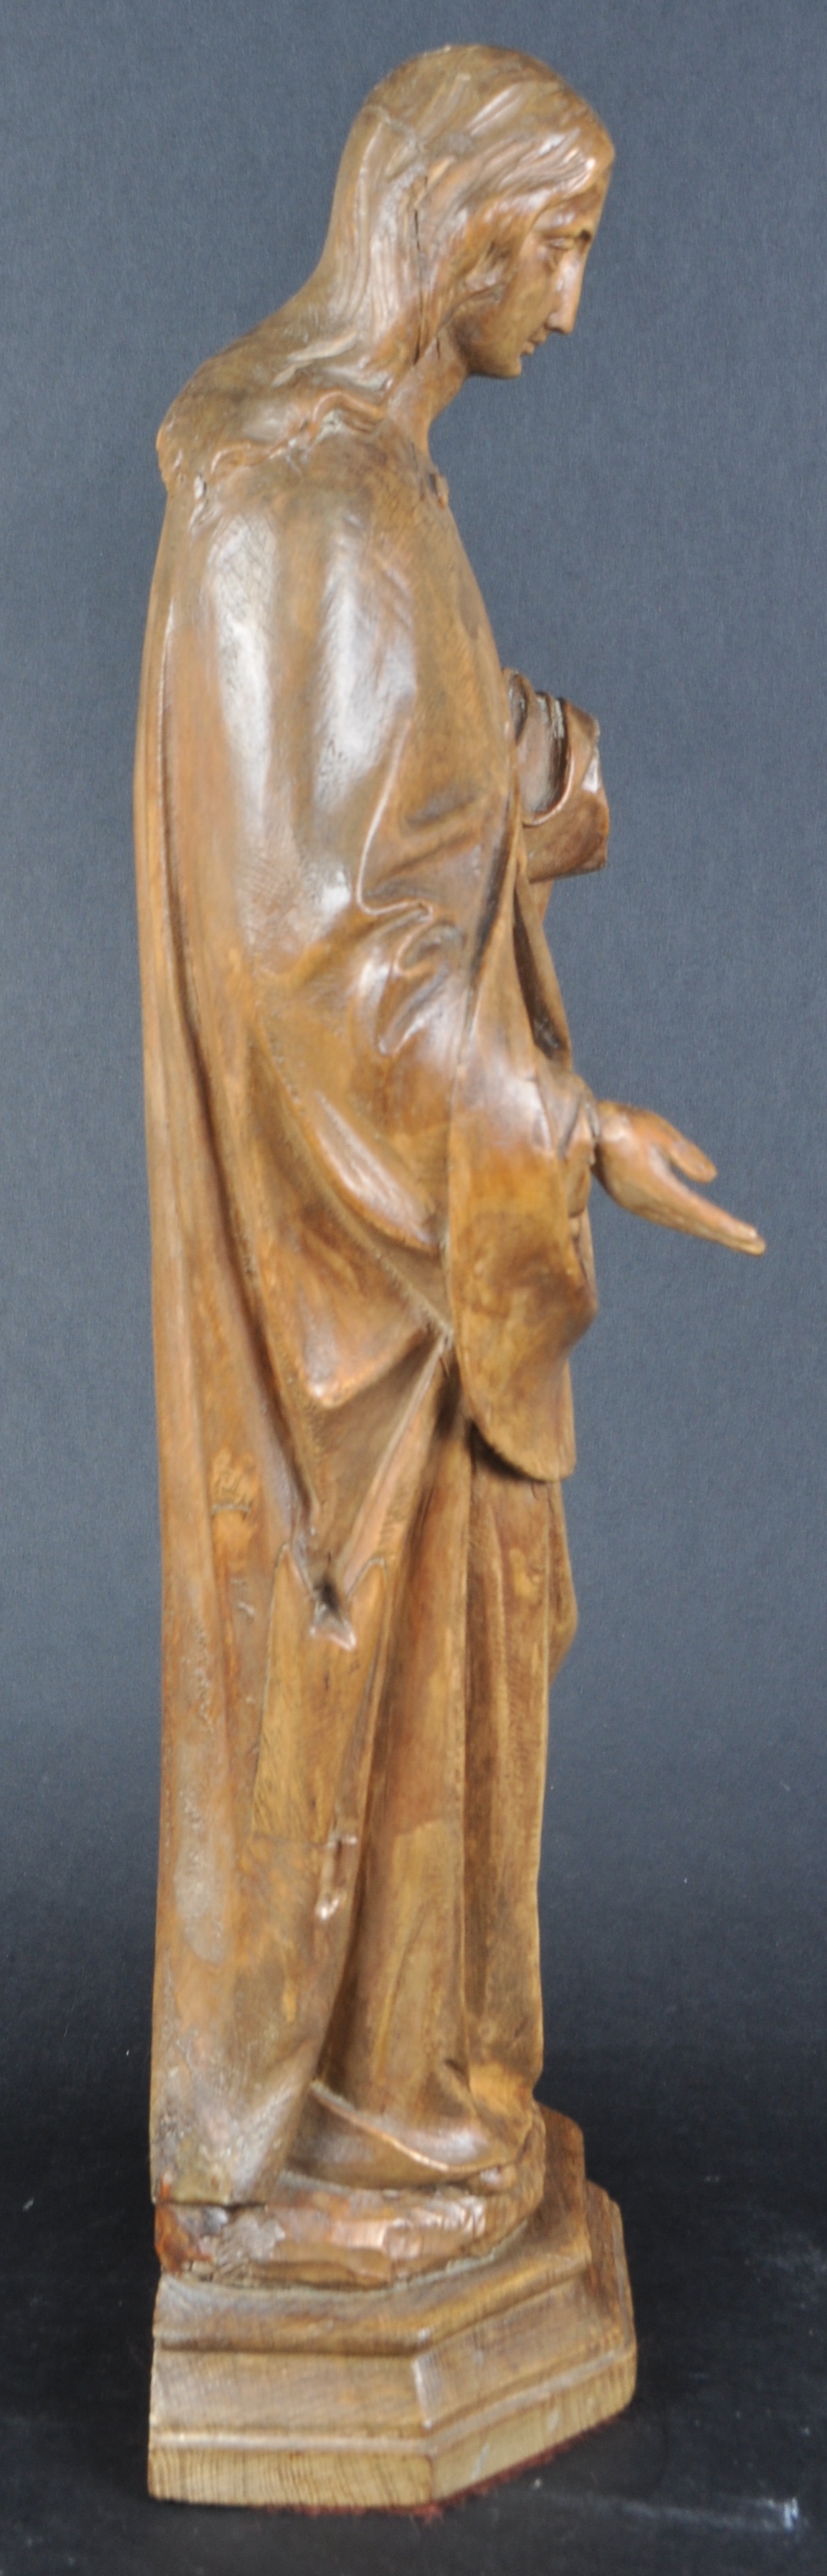 LARGE WALNUT CARVING OF THE VIRGIN MARY - Image 7 of 7